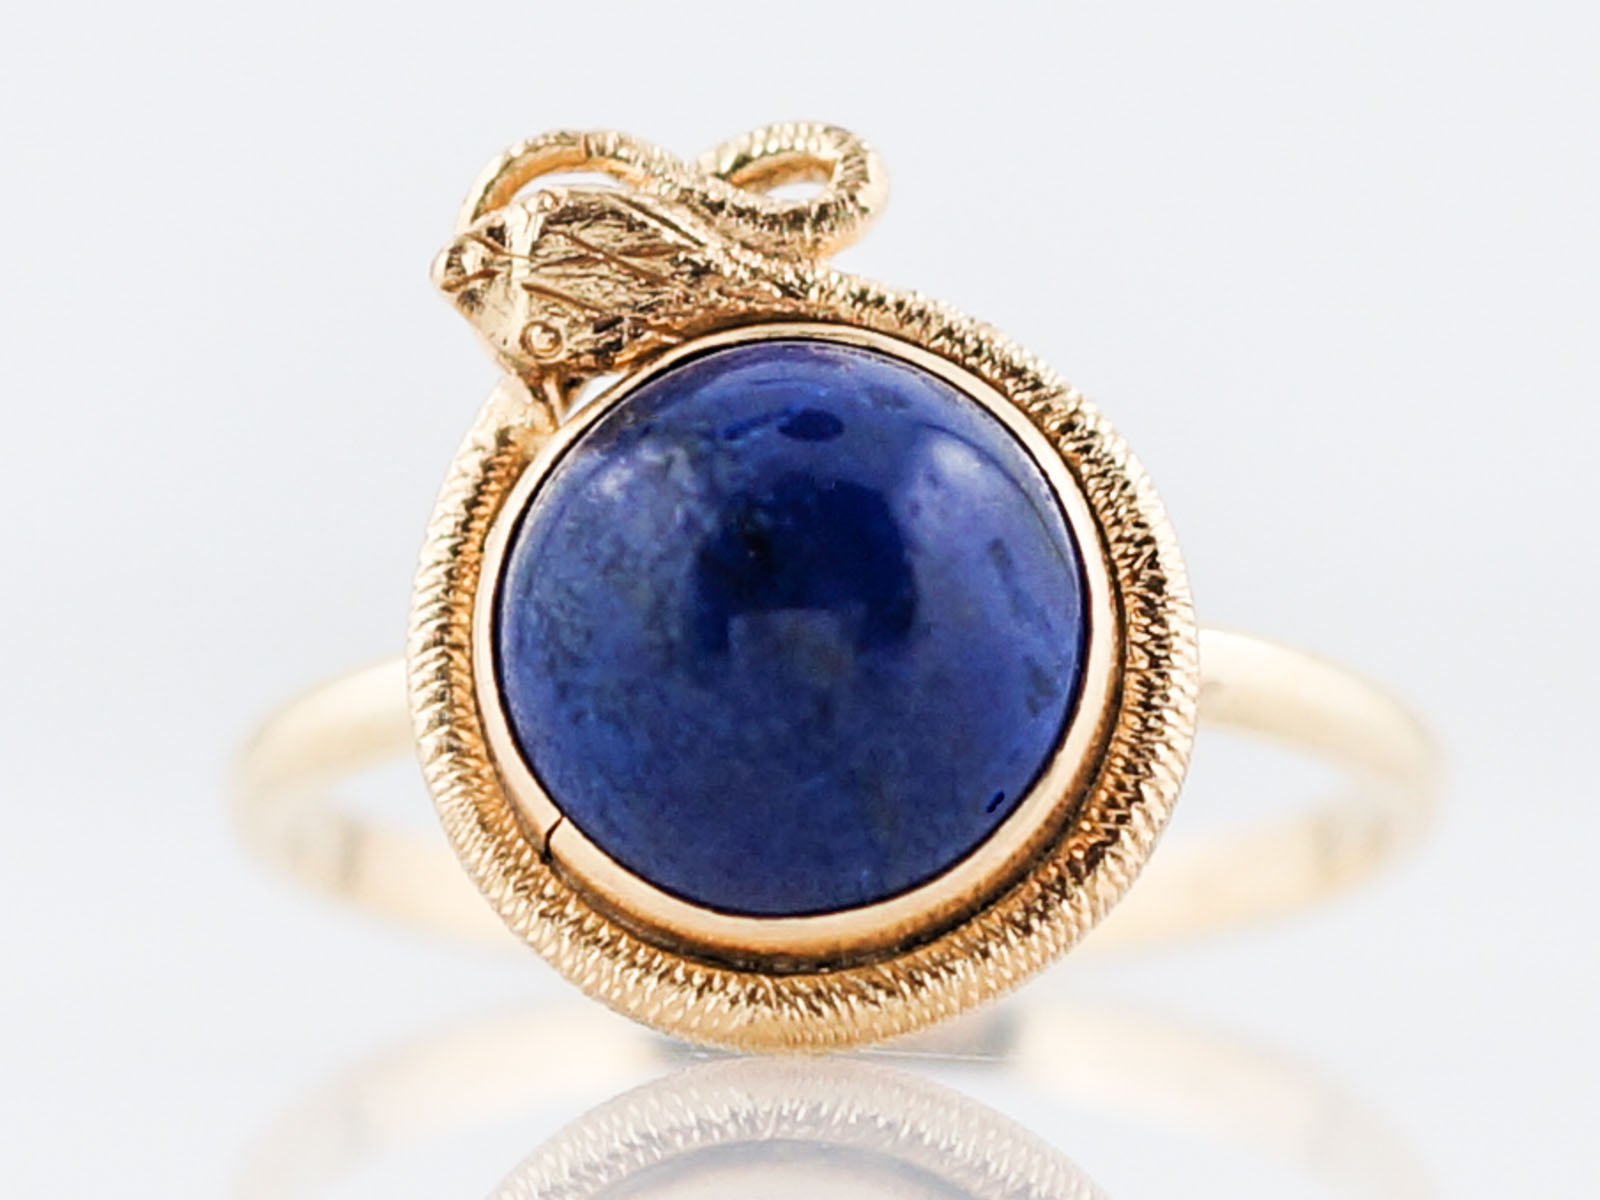 Antique Right Hand Ring Victorian 1.58 Cabochon Cut Lapis in 14k Yellow Gold